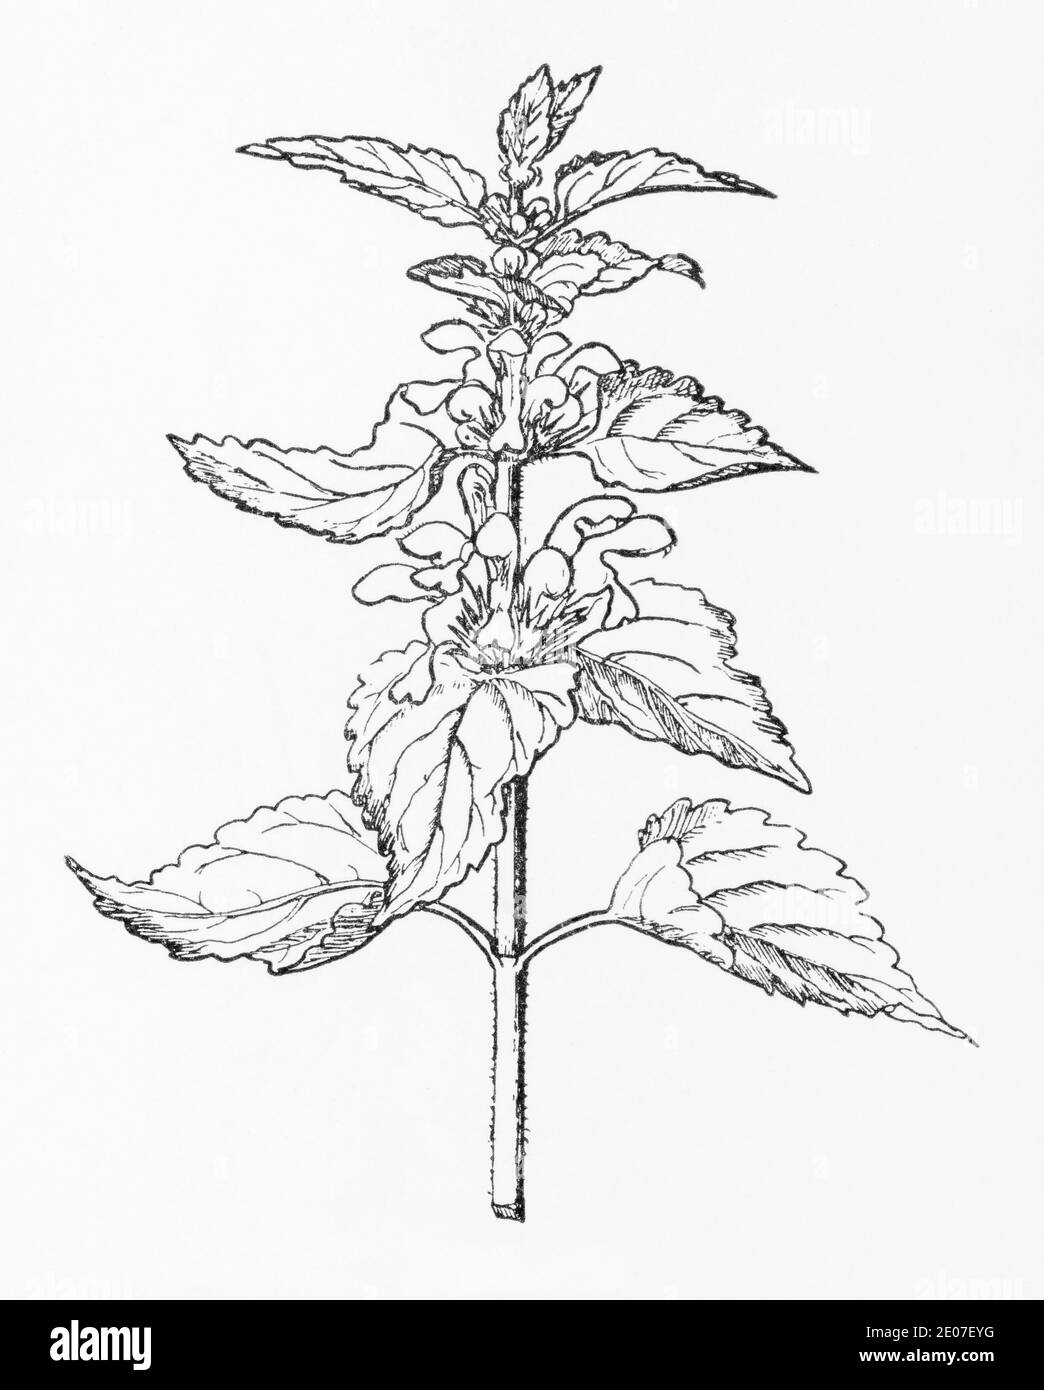 Old botanical illustration engraving of White Dead Nettle / Lamium album. Traditional medicinal herbal plant. See Notes Stock Photo